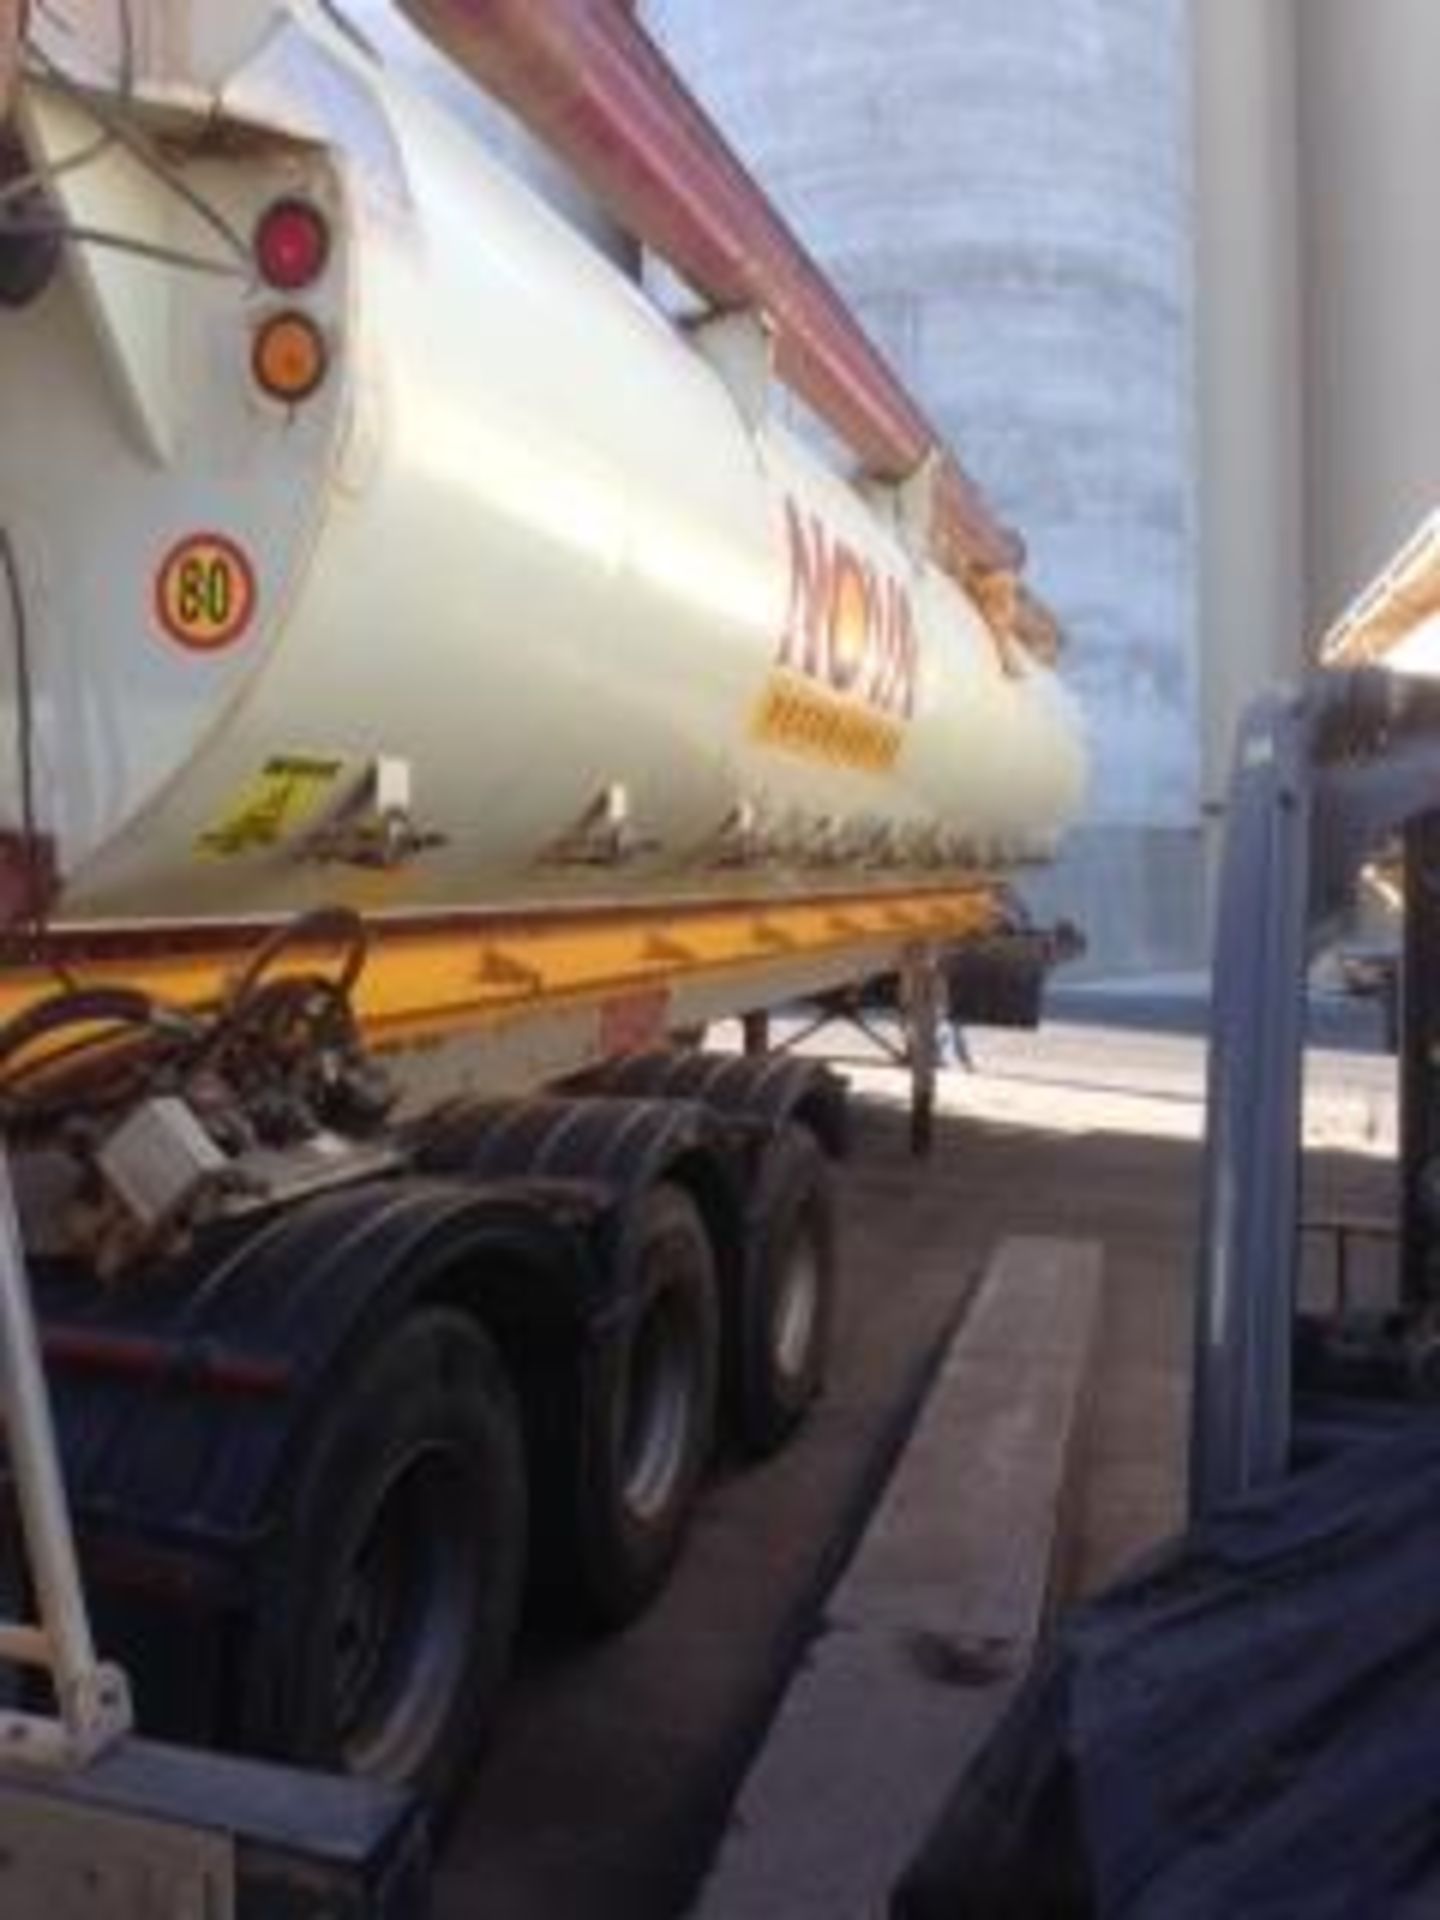 2008 AUGER TRI-AXLE AUGER BULK TANKER TRAILER CK3375 - Subject to Confirmation - Image 4 of 9